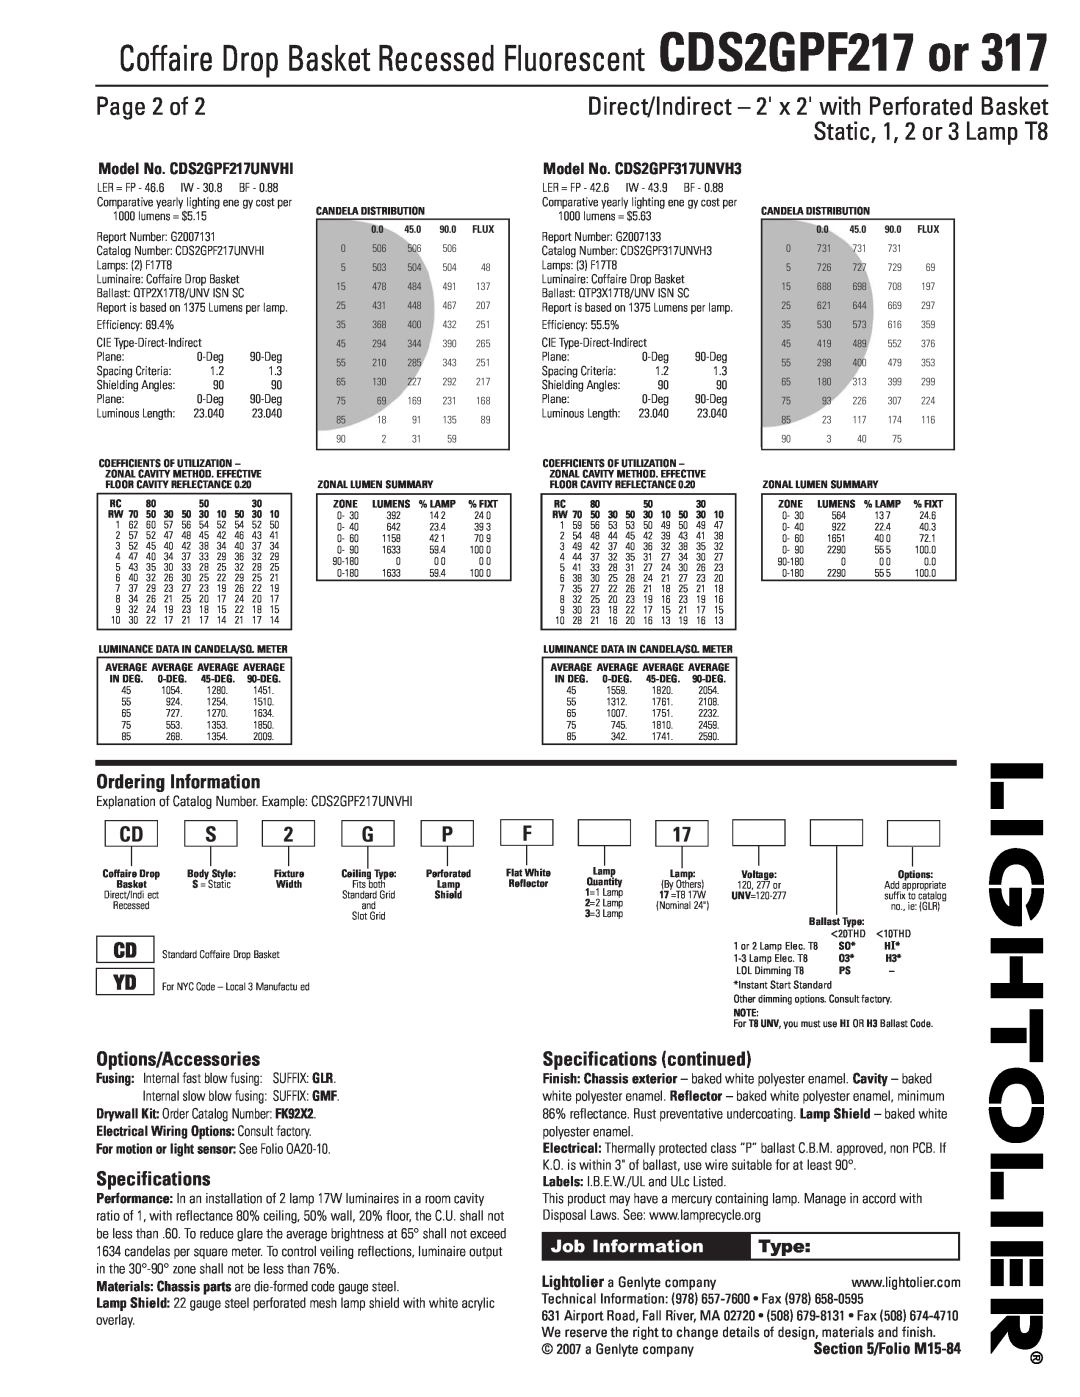 Lightolier CDS2GPF317 Page 2 of, Ordering Information, Options/Accessories, Specifications continued, Job Information 